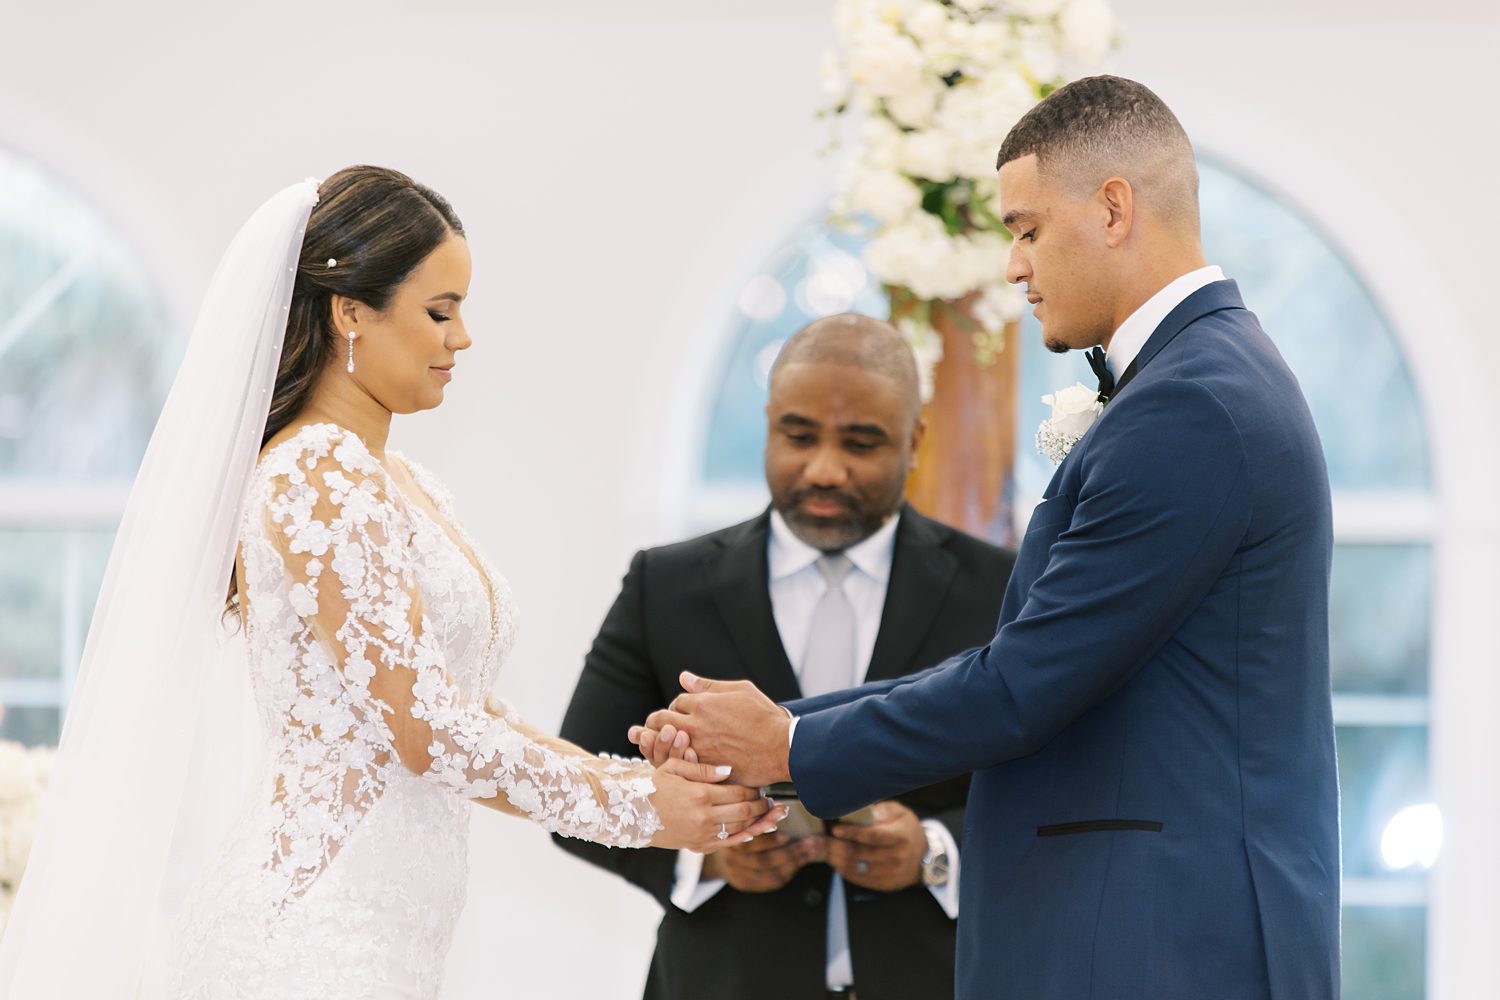 newlyweds exchange vows during wedding ceremony at Harborside Chapel in Tampa FL